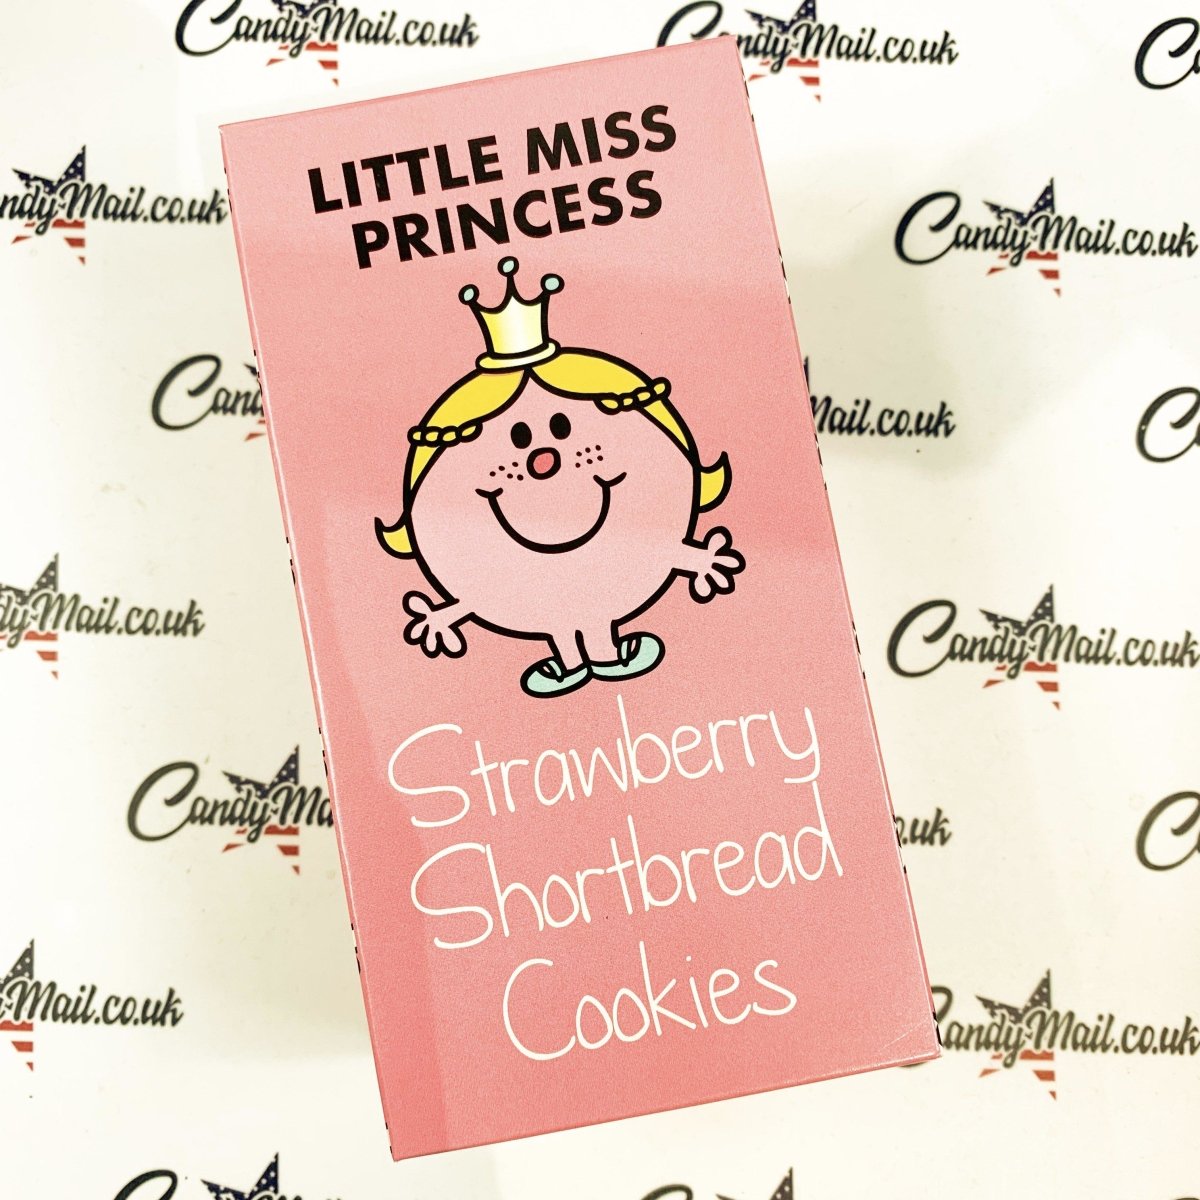 Little Miss Princess Strawberry Shortbread Cookies 150g - Candy Mail UK